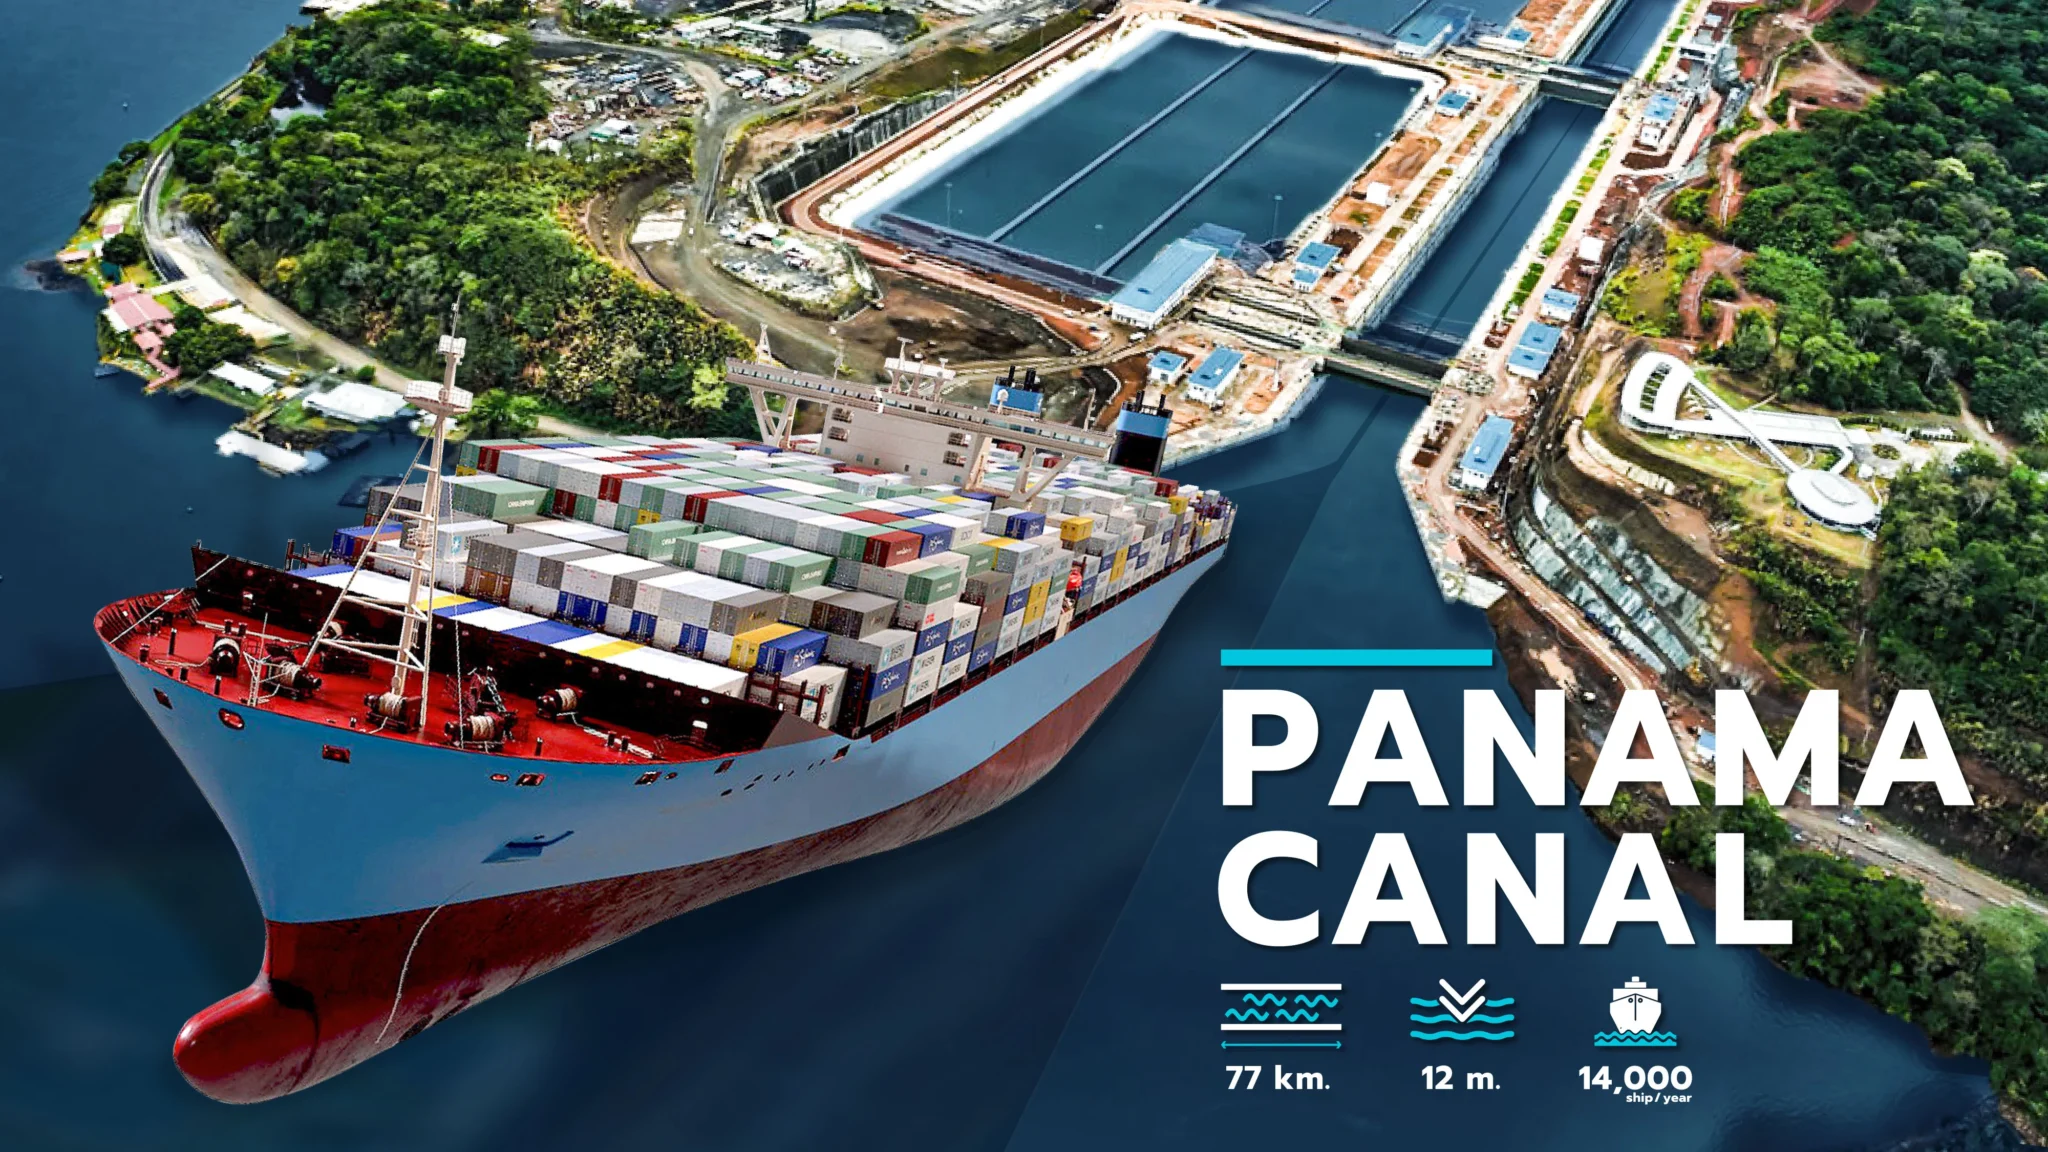 Panama Canal, one of the world’s major maritime routes